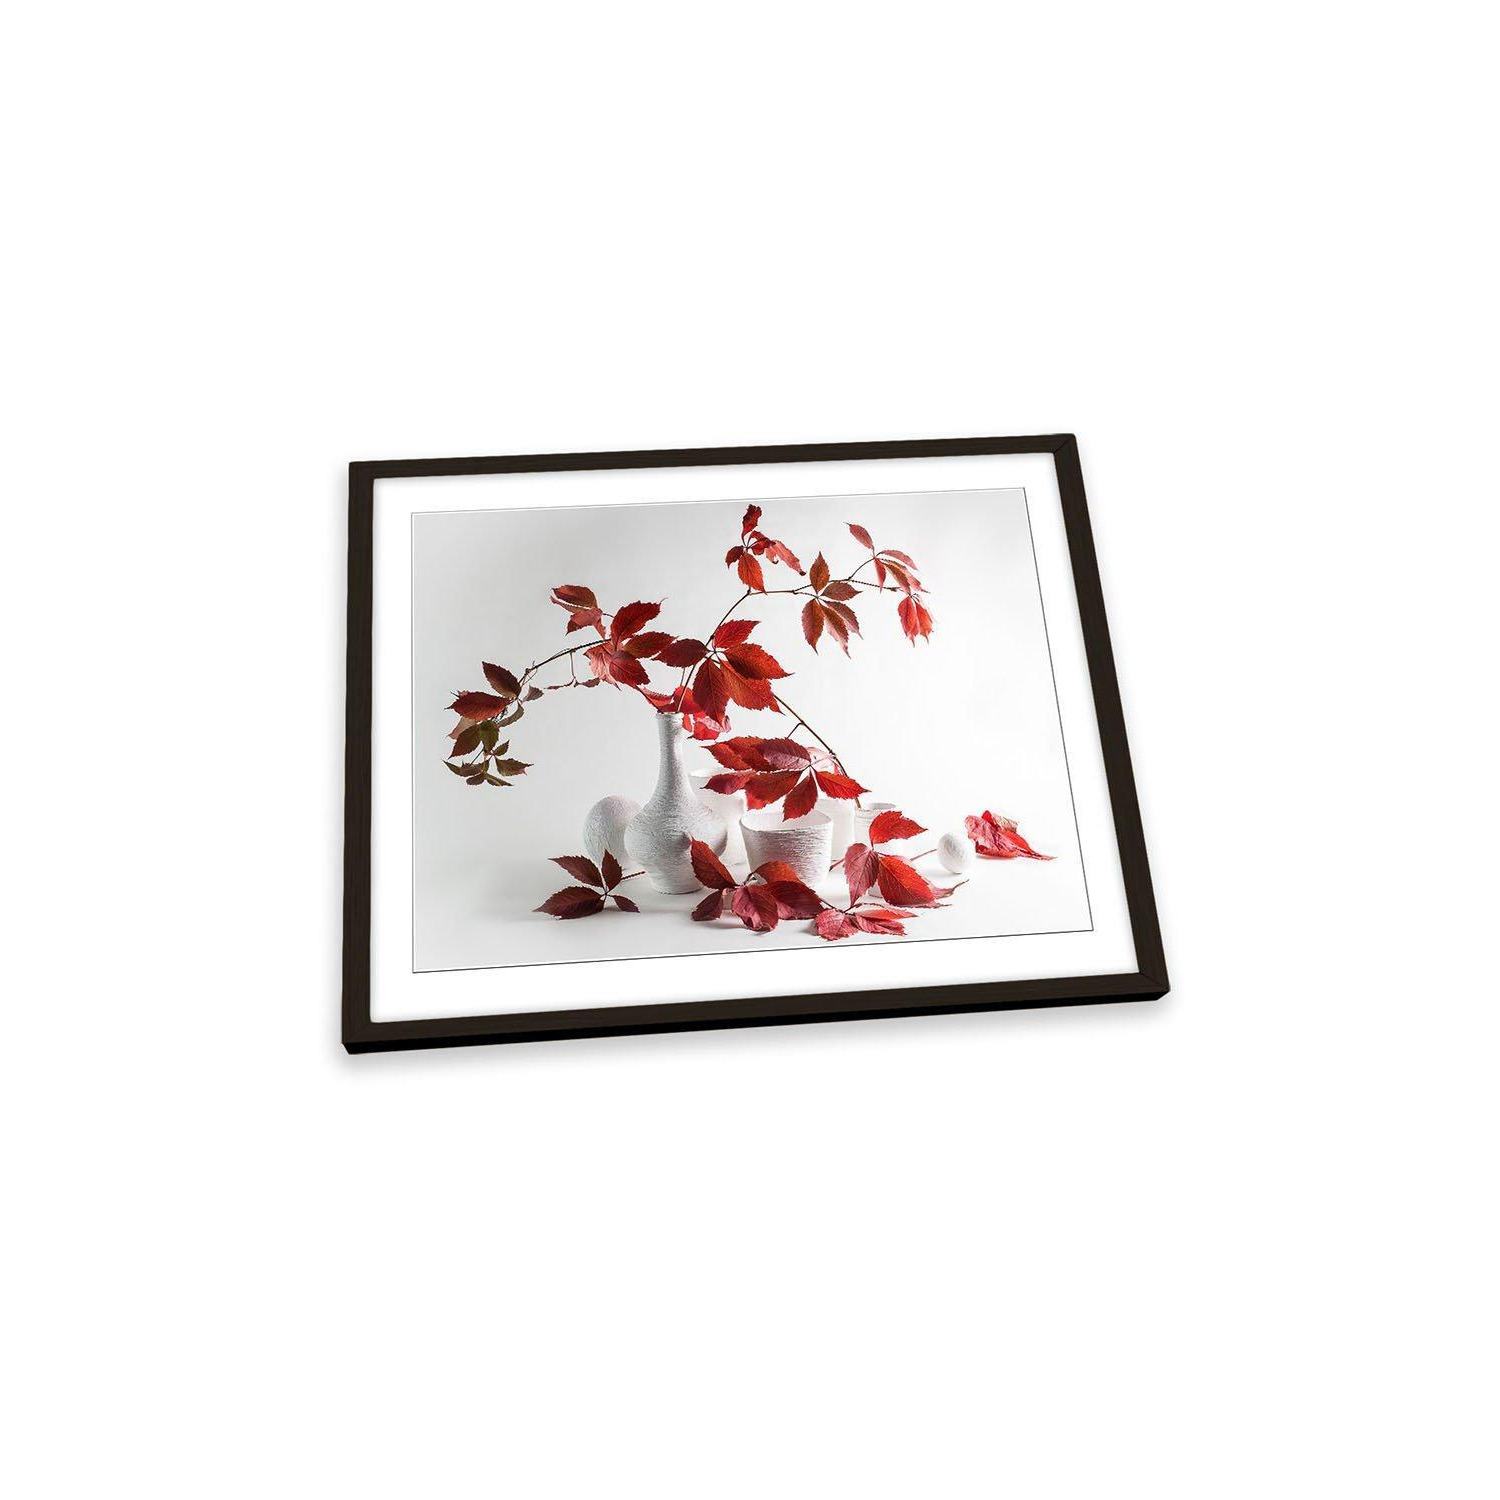 Red and White Leaves Vase Floral Framed Art Print Picture Wall Artwork - (W)64cm x (H)47cm - image 1